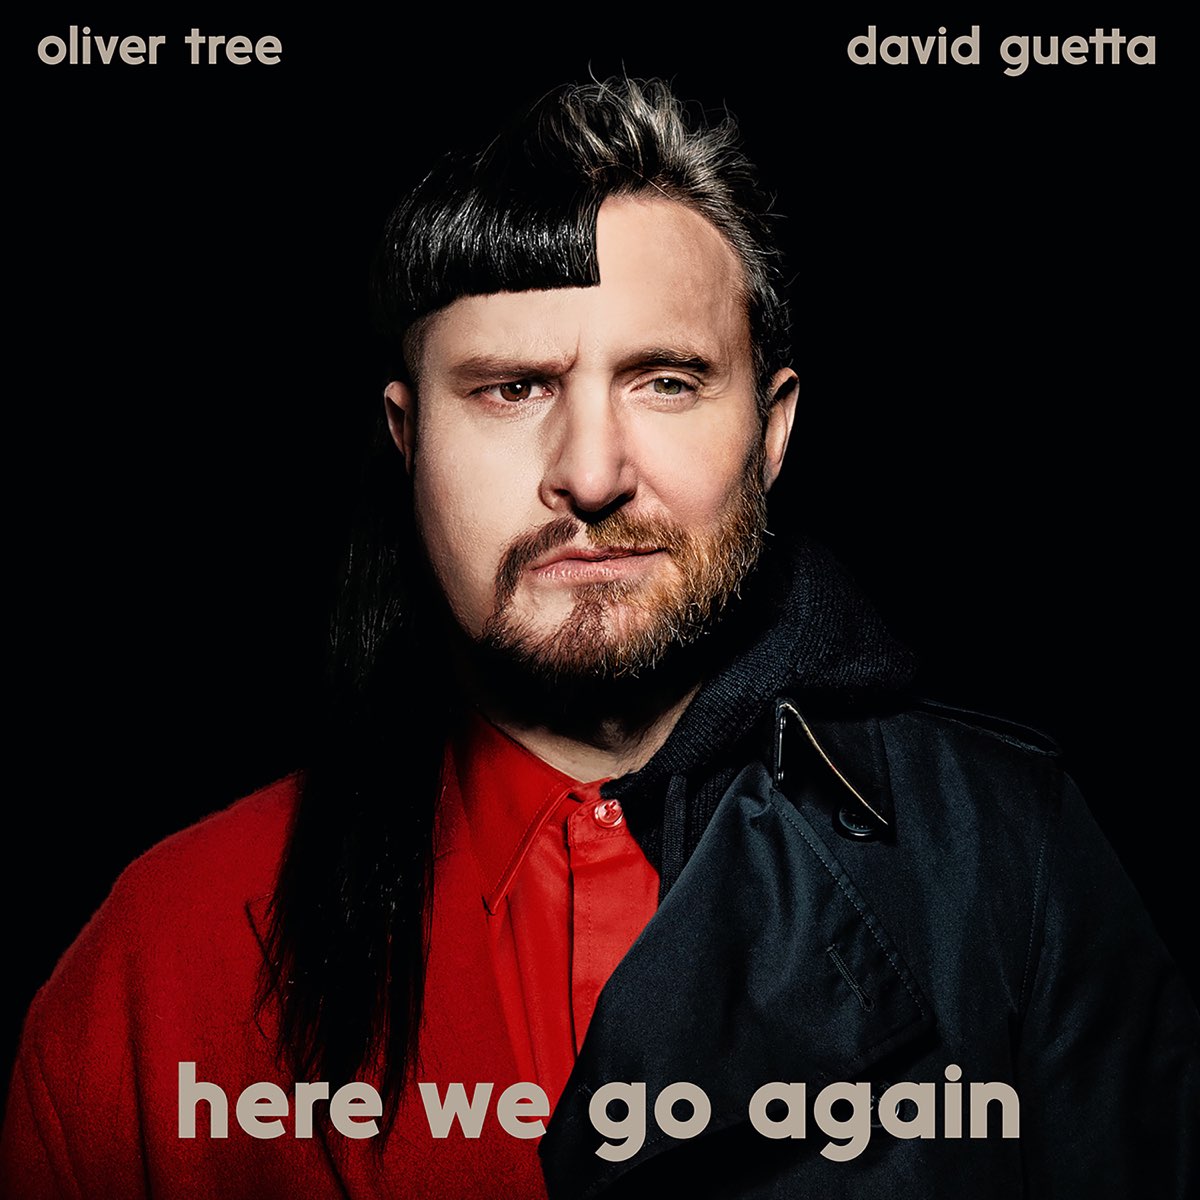 Here We Go Again - Single - Album by Oliver Tree & David Guetta